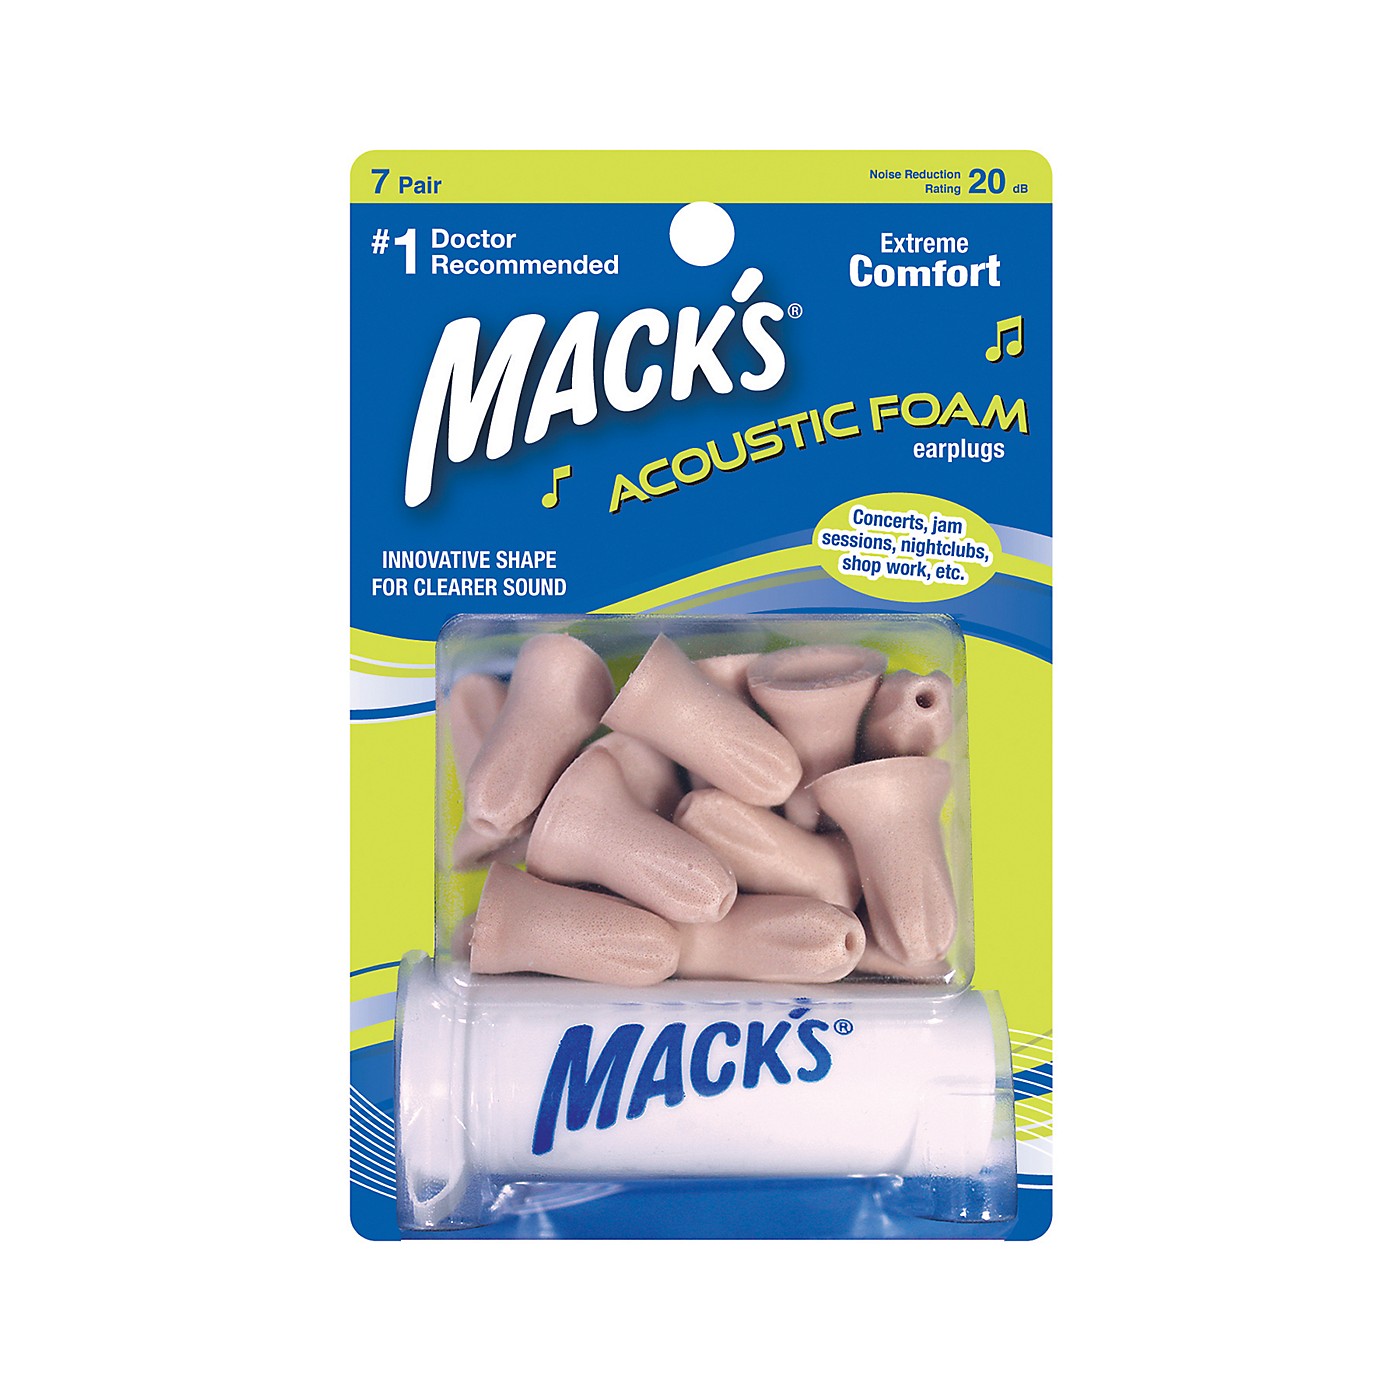 Mack's Acoustic Foam Ear Plugs 7 Pair Blister Pack with Free Travel Case thumbnail